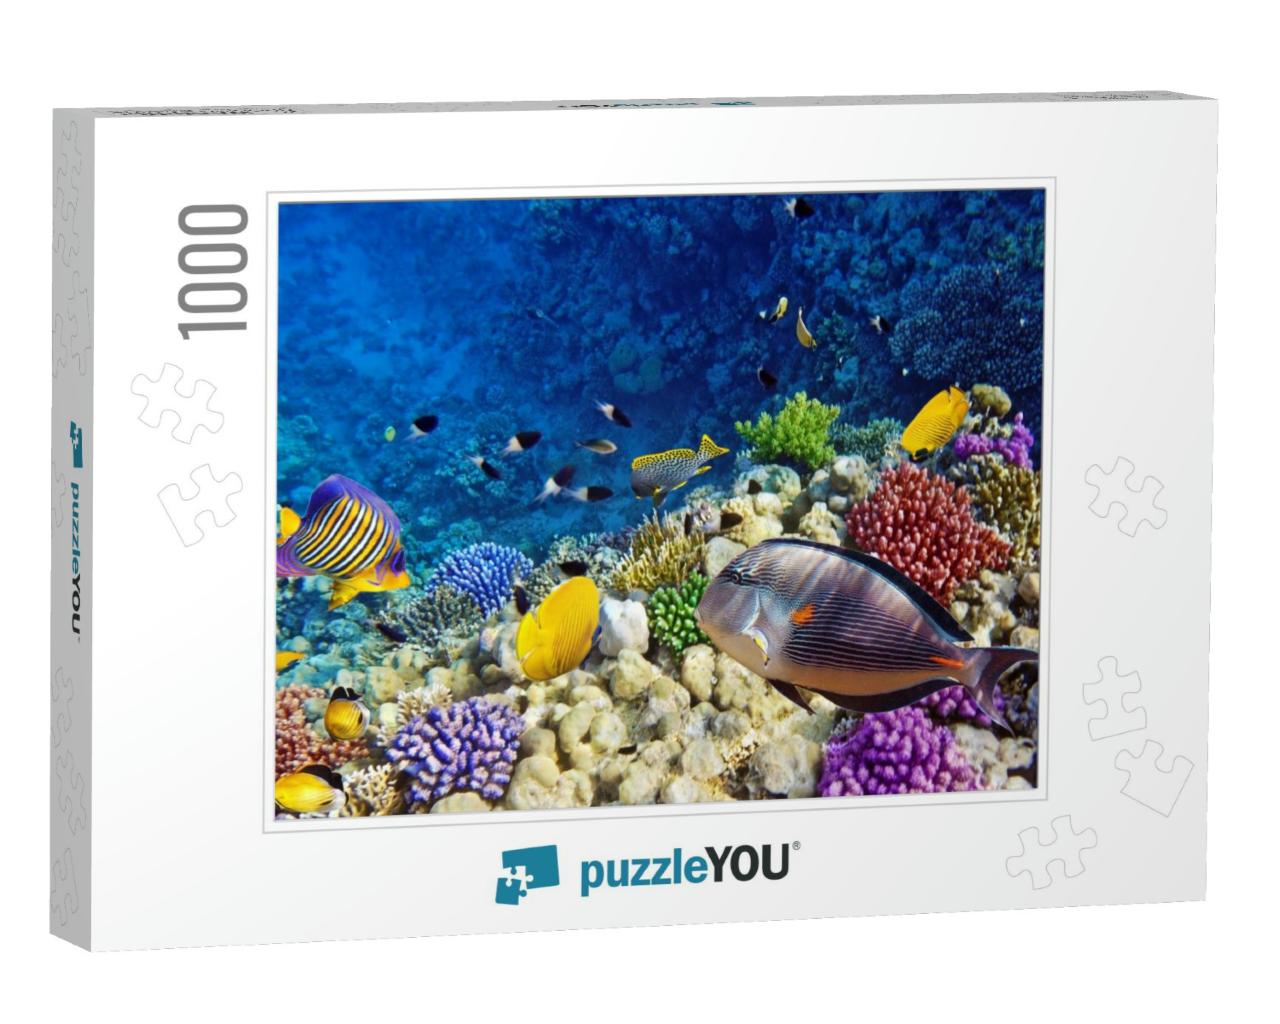 Coral & Fish in the Red Sea. Egypt... Jigsaw Puzzle with 1000 pieces